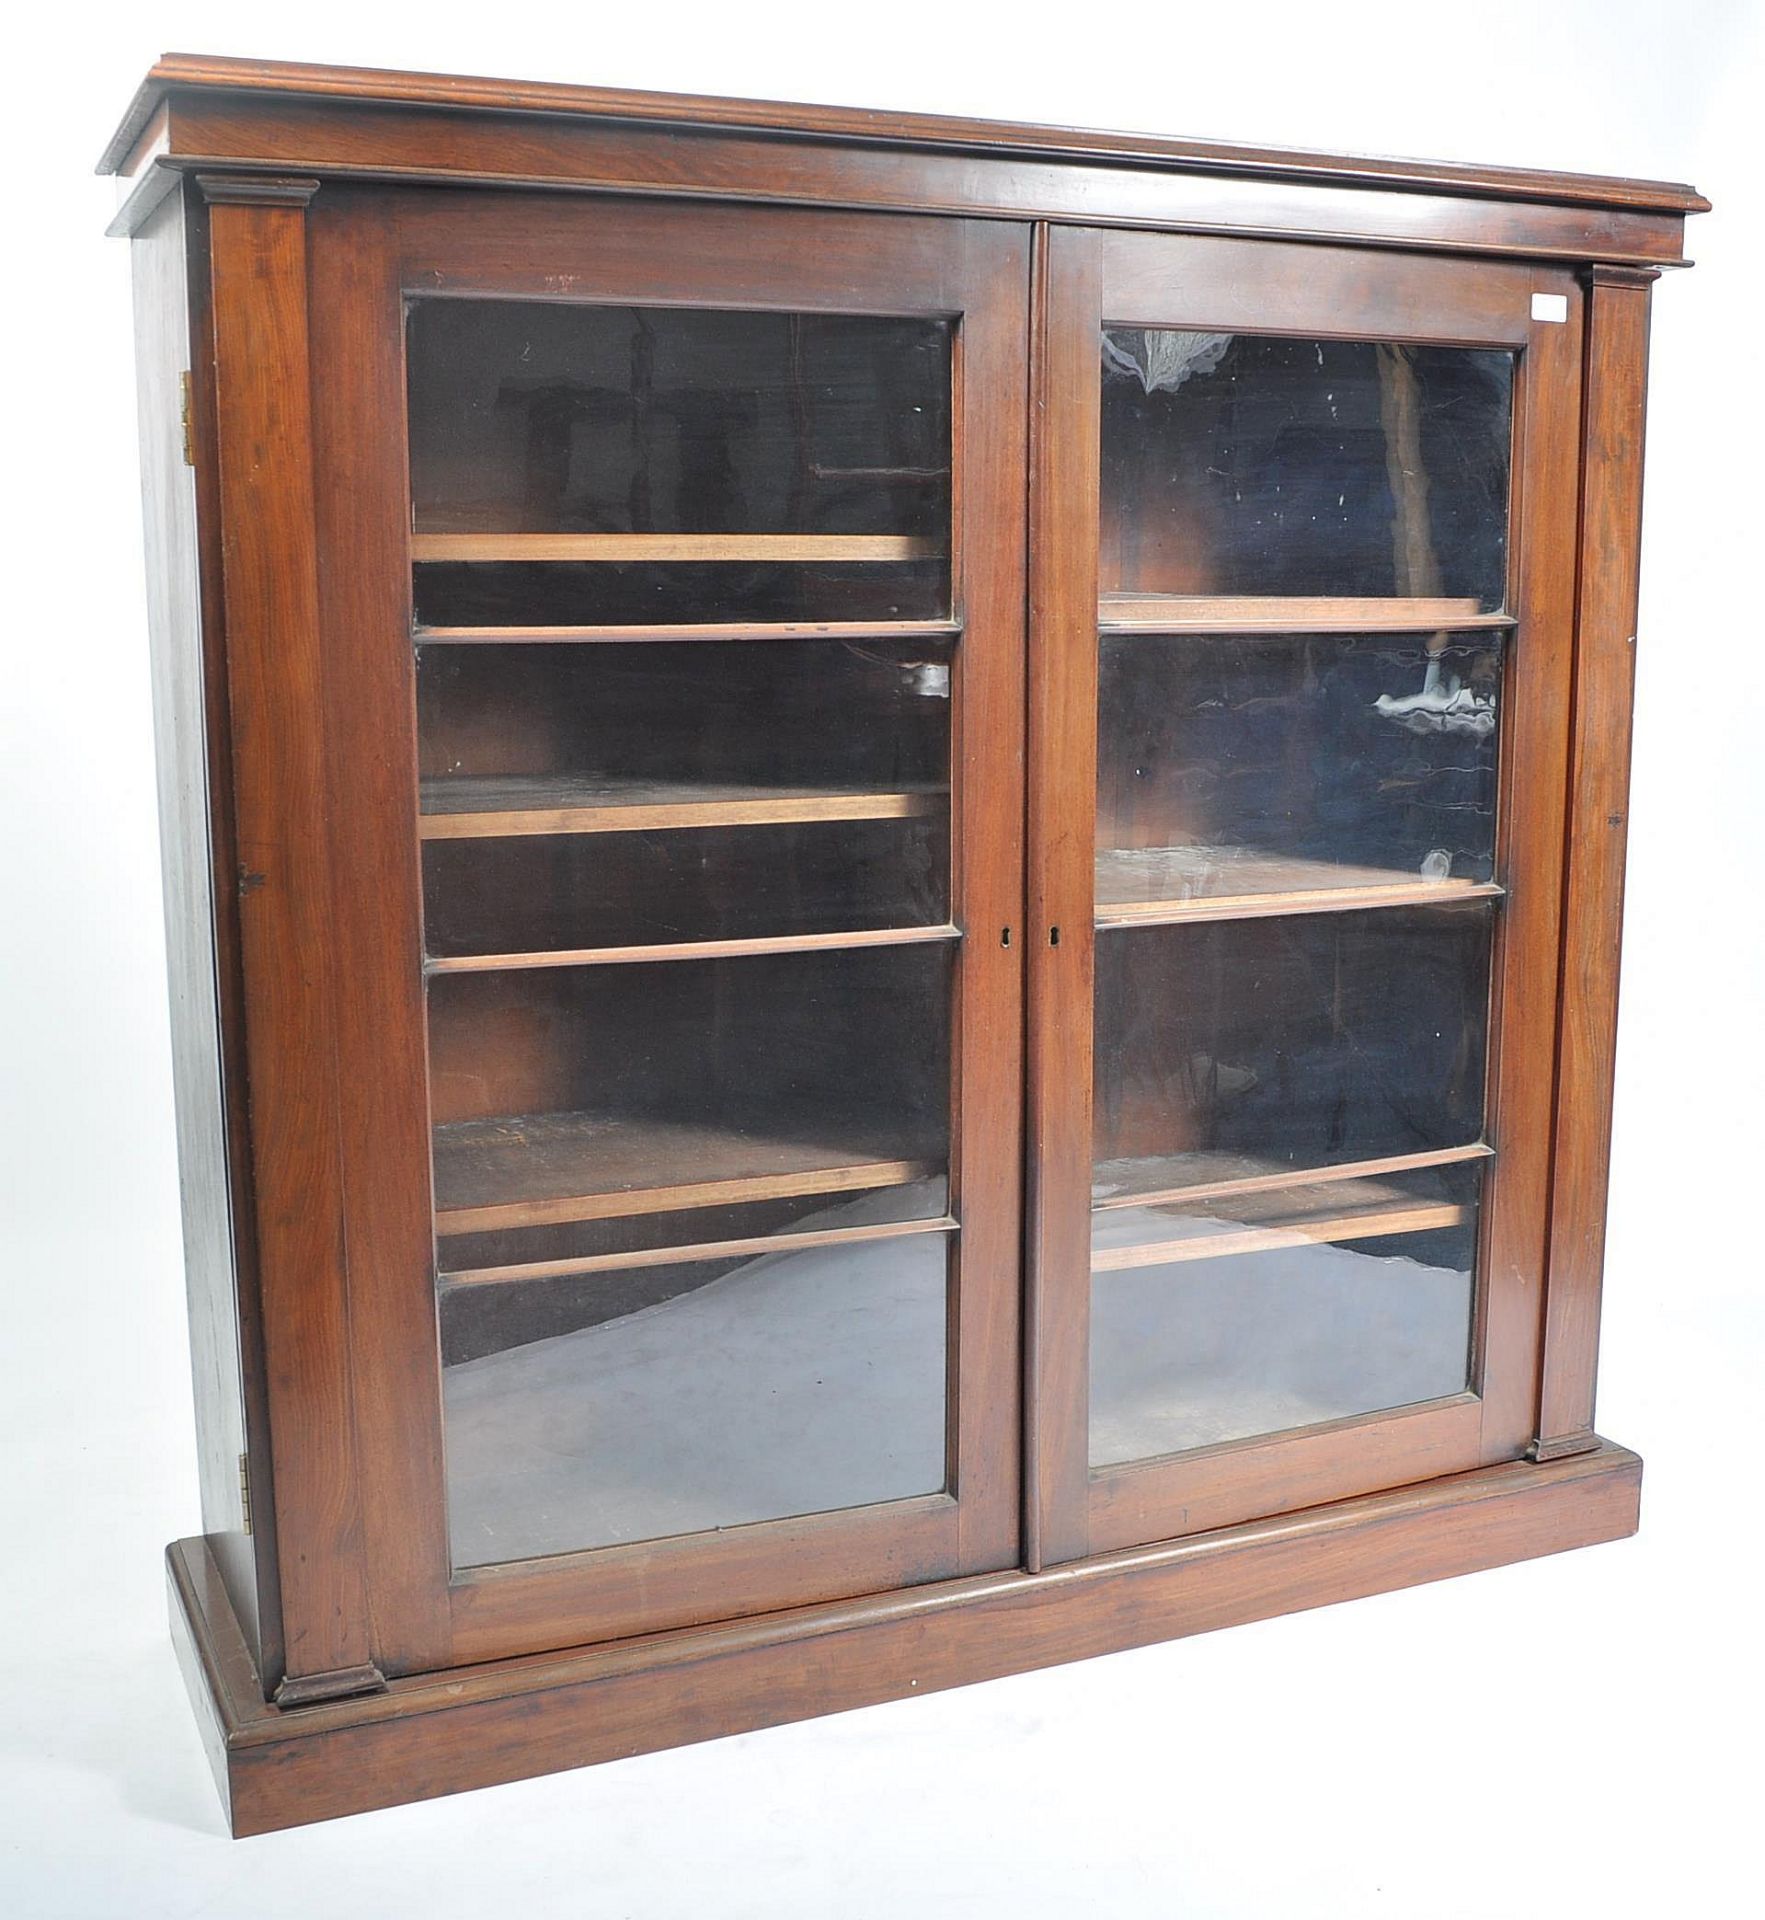 LARGE MAHOGANY 19TH CENTURY VICTORIAN LIBRARY BOOKCASE CABINET